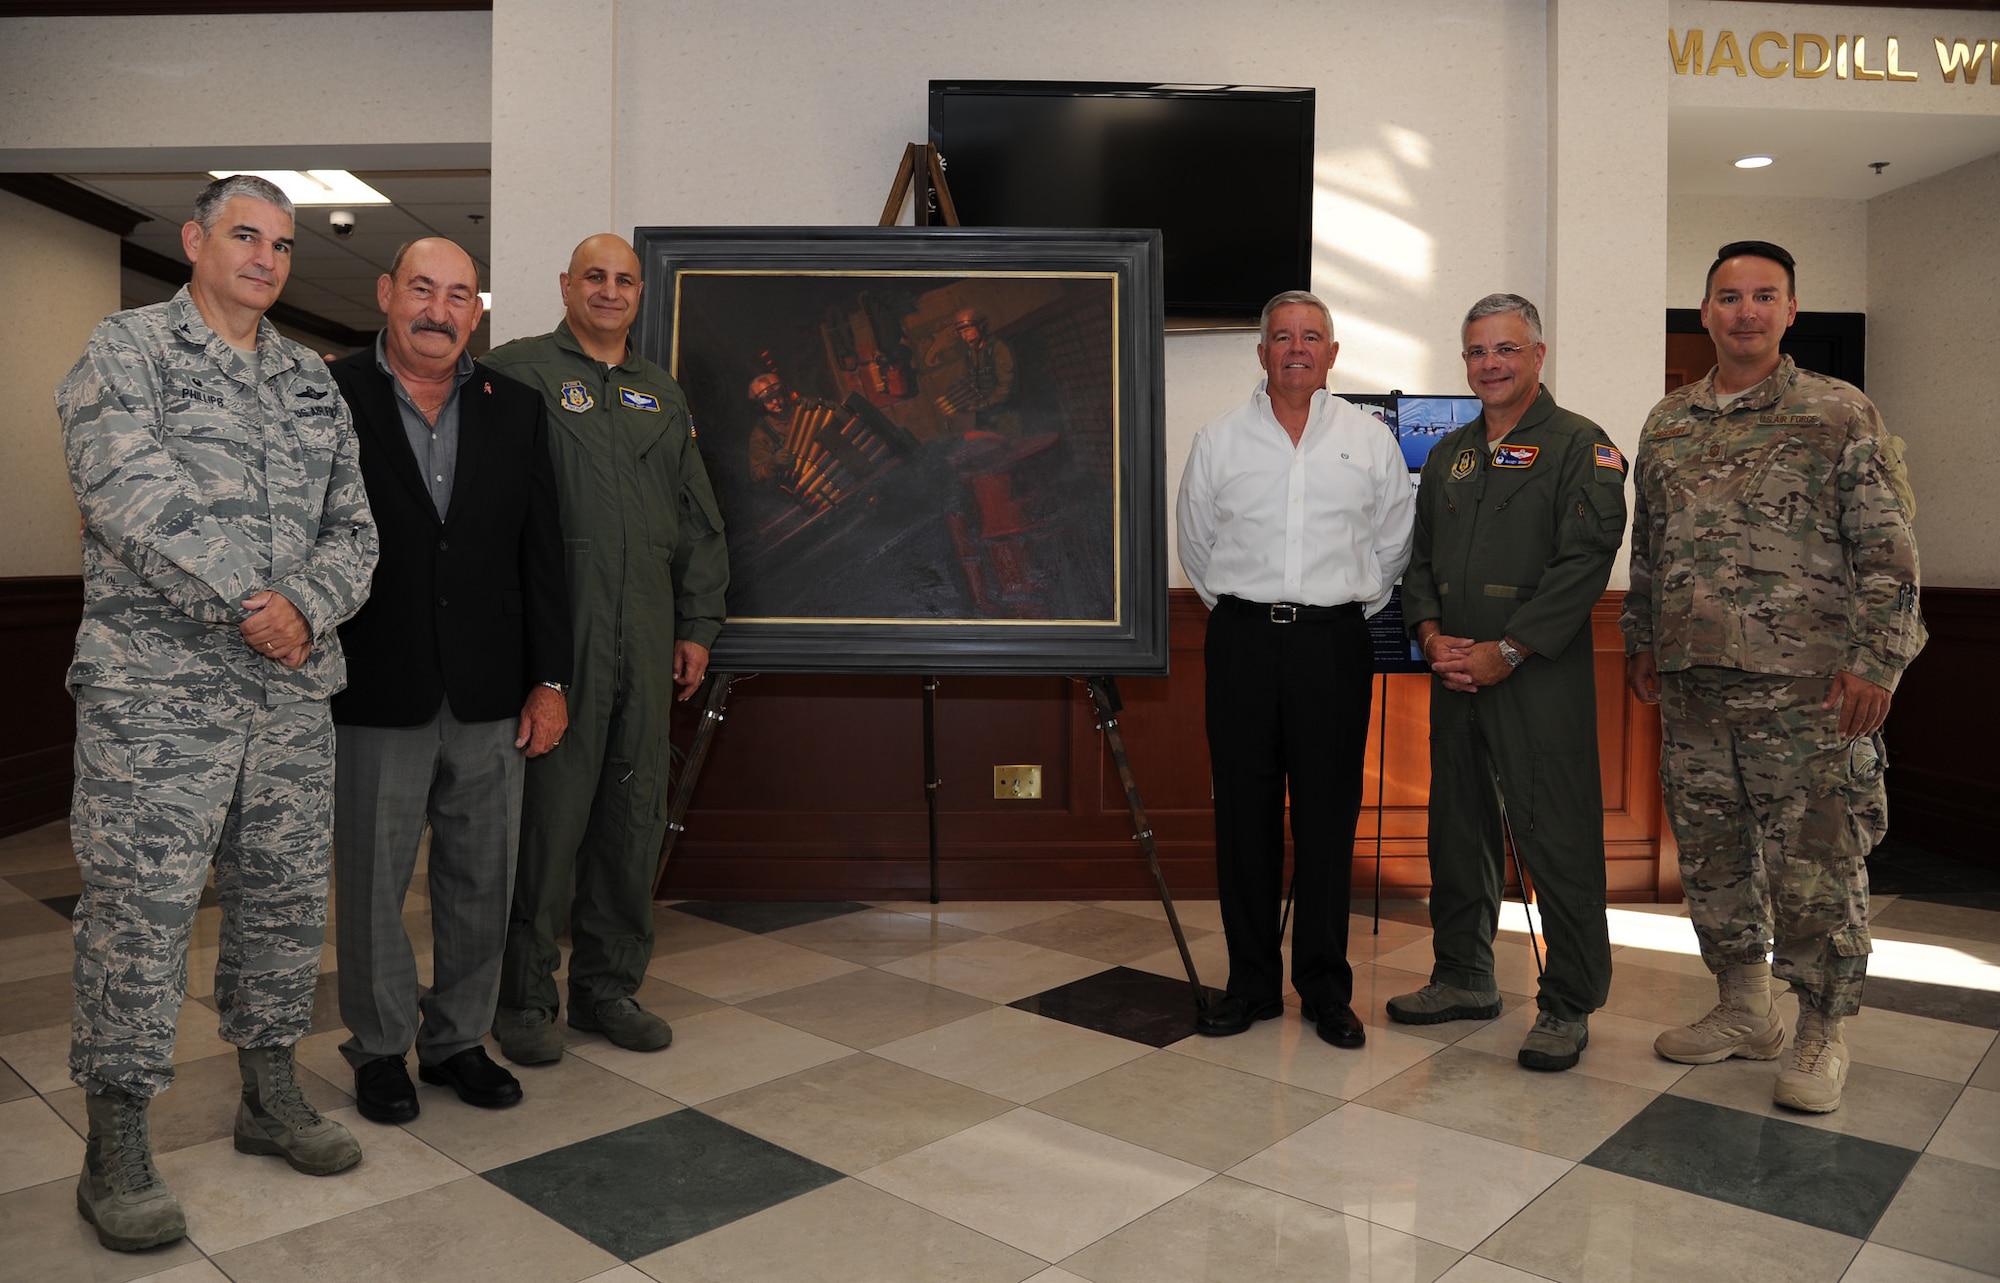 Current and past members of the 919th Special Operations Wing stand beside the newly unveiled painting “Ghost on the Highway” by Maj. Warren Neary during a ceremony May 23 at MacDill Air Force Base, Fla.  The painting marked the 25th anniversary of Operation Desert Storm and was unveiled with Gen. Raymond Thomas, commander of U.S. Special Operations Command, during the Retired Special Operations Senior Leader Conference.  (U.S. Air Force photo/Tech. Sgt. Peter Dean)